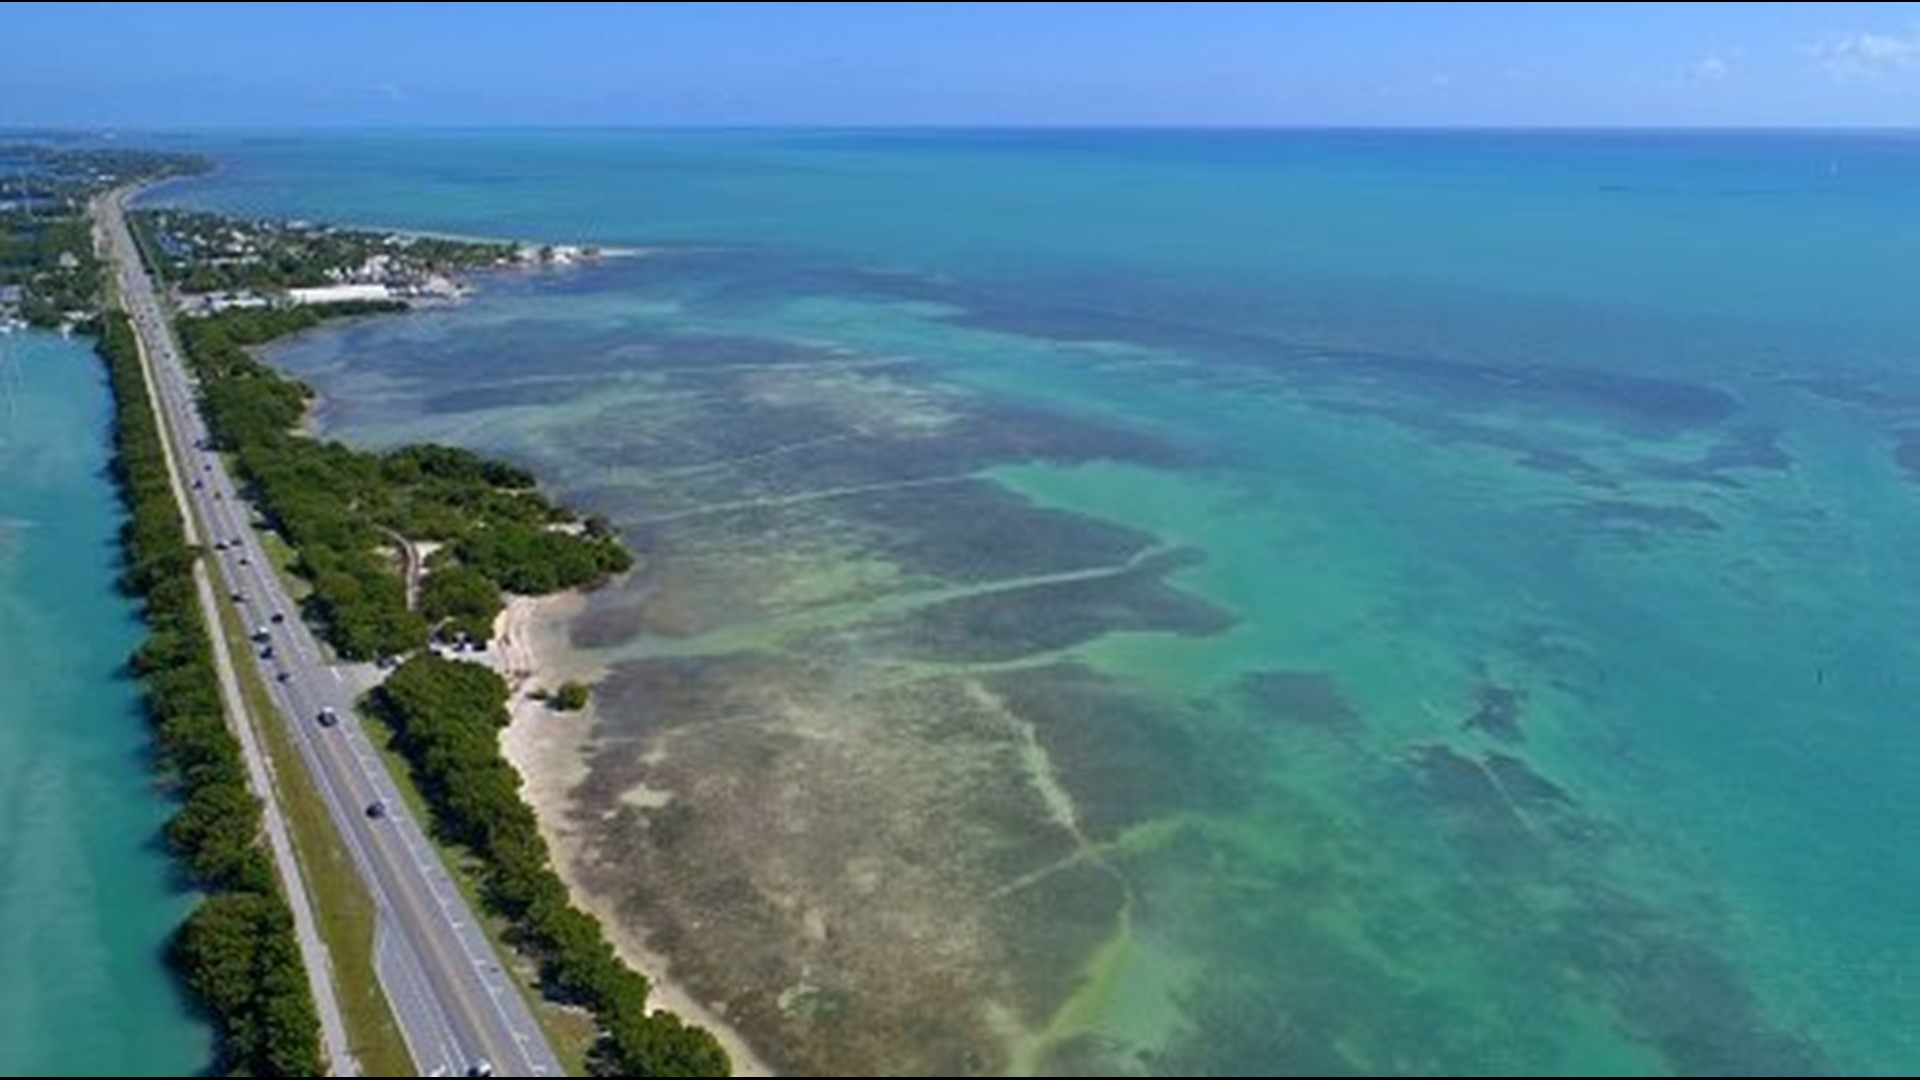 A man from Arkansas died during a scuba diving trip in the Florida Keys.